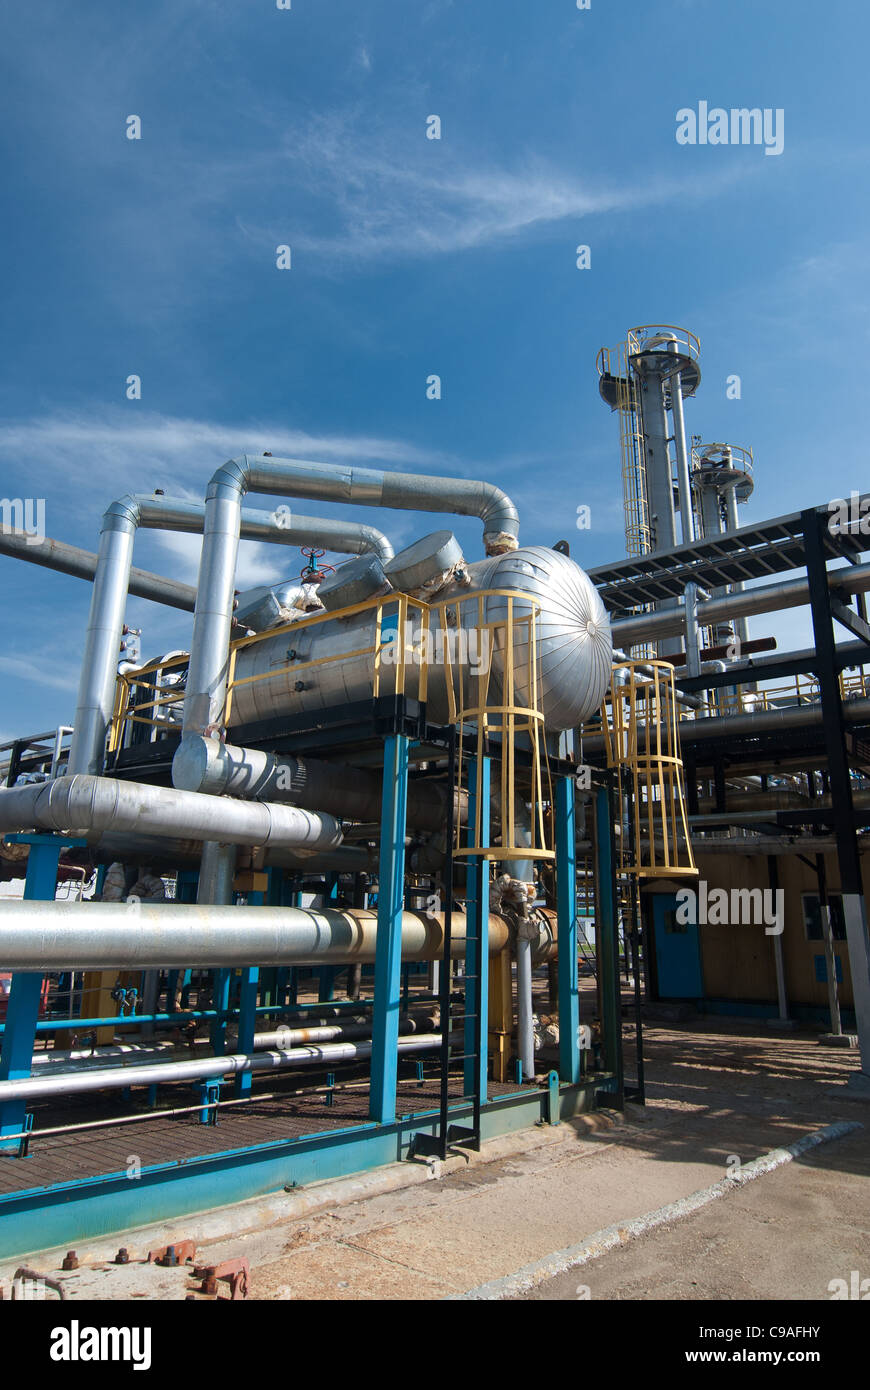 Gas industry. sulfur refinement factory Stock Photo